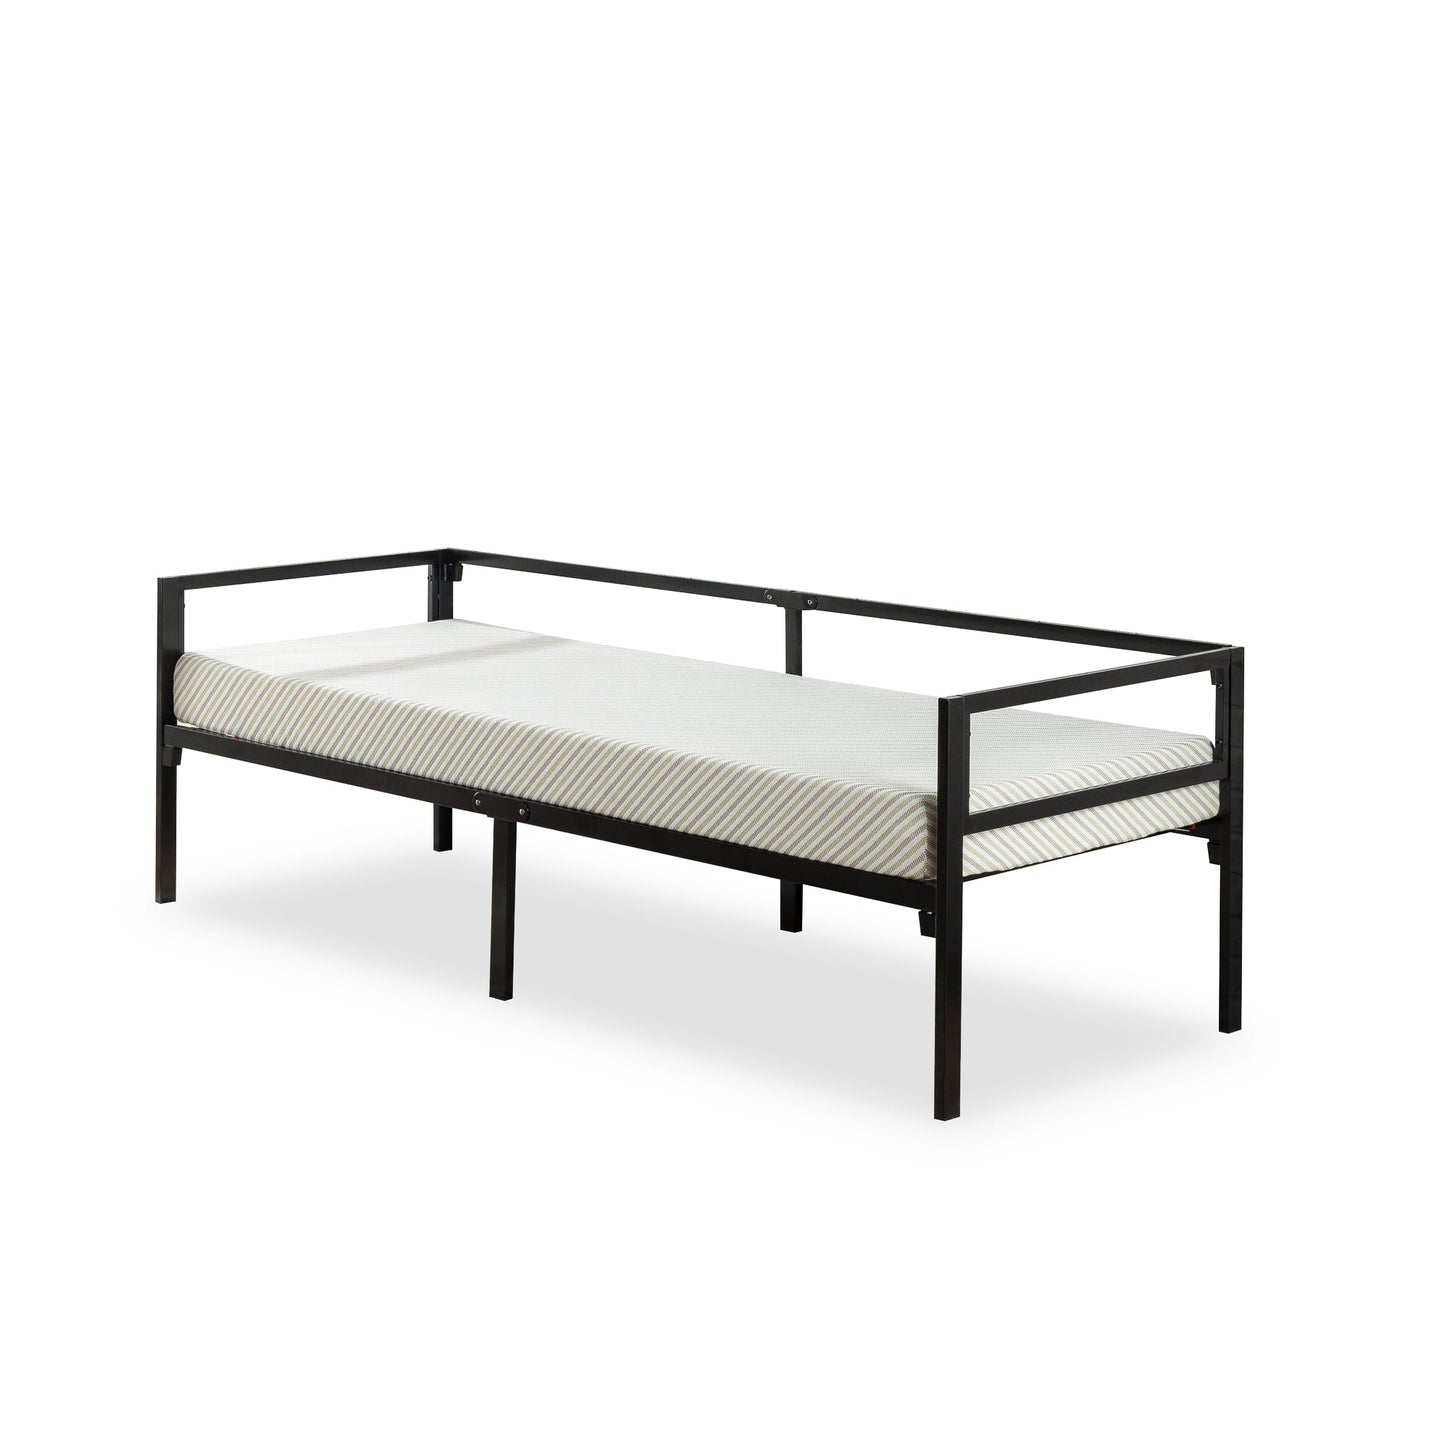 Quick Lock Metal Daybed with Memory Foam Mattress